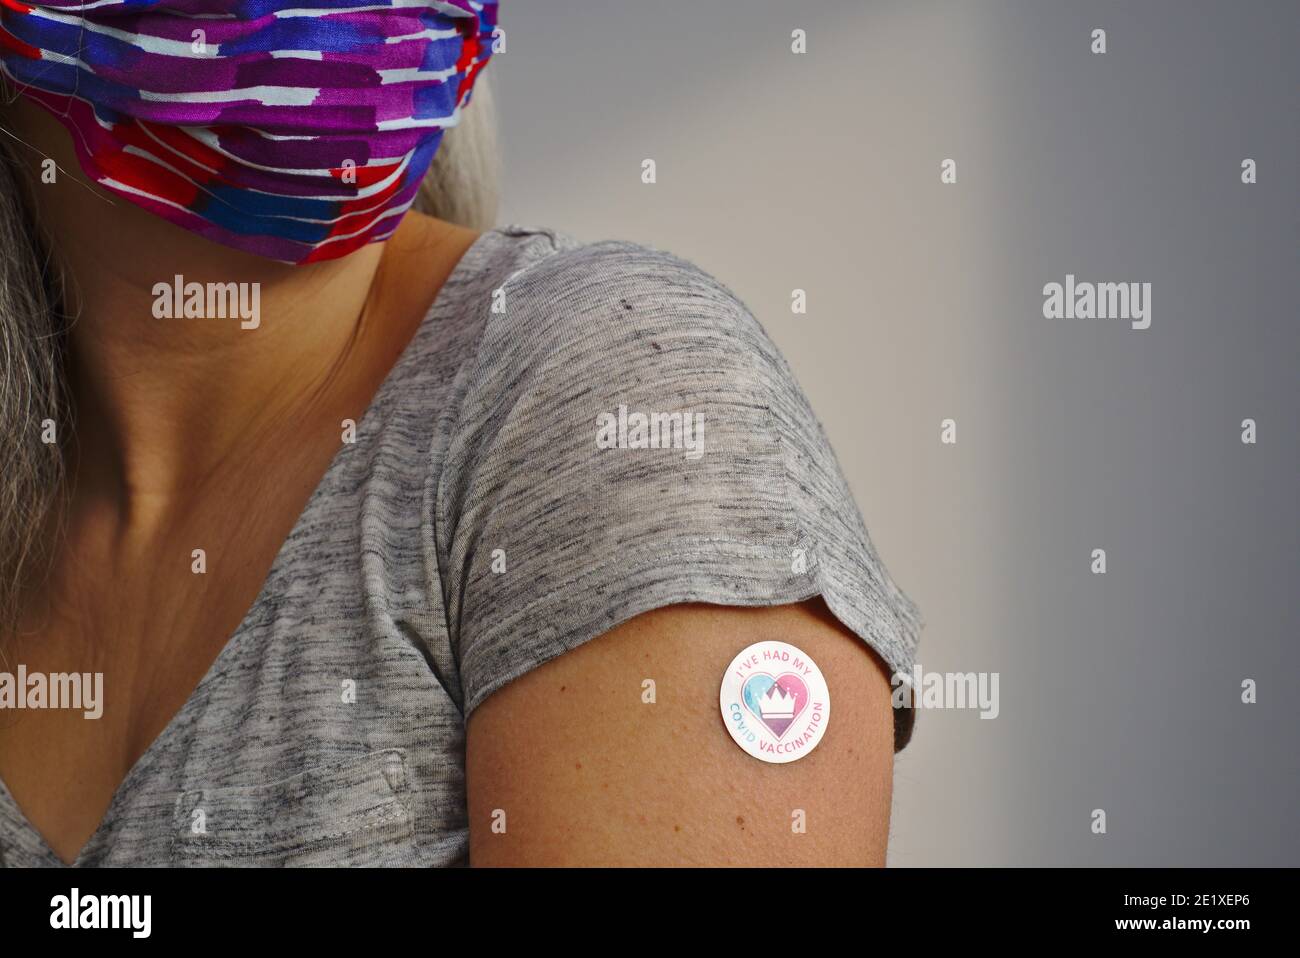 Woman wearing Covid19 mask has had her covid vaccination. Stock Photo